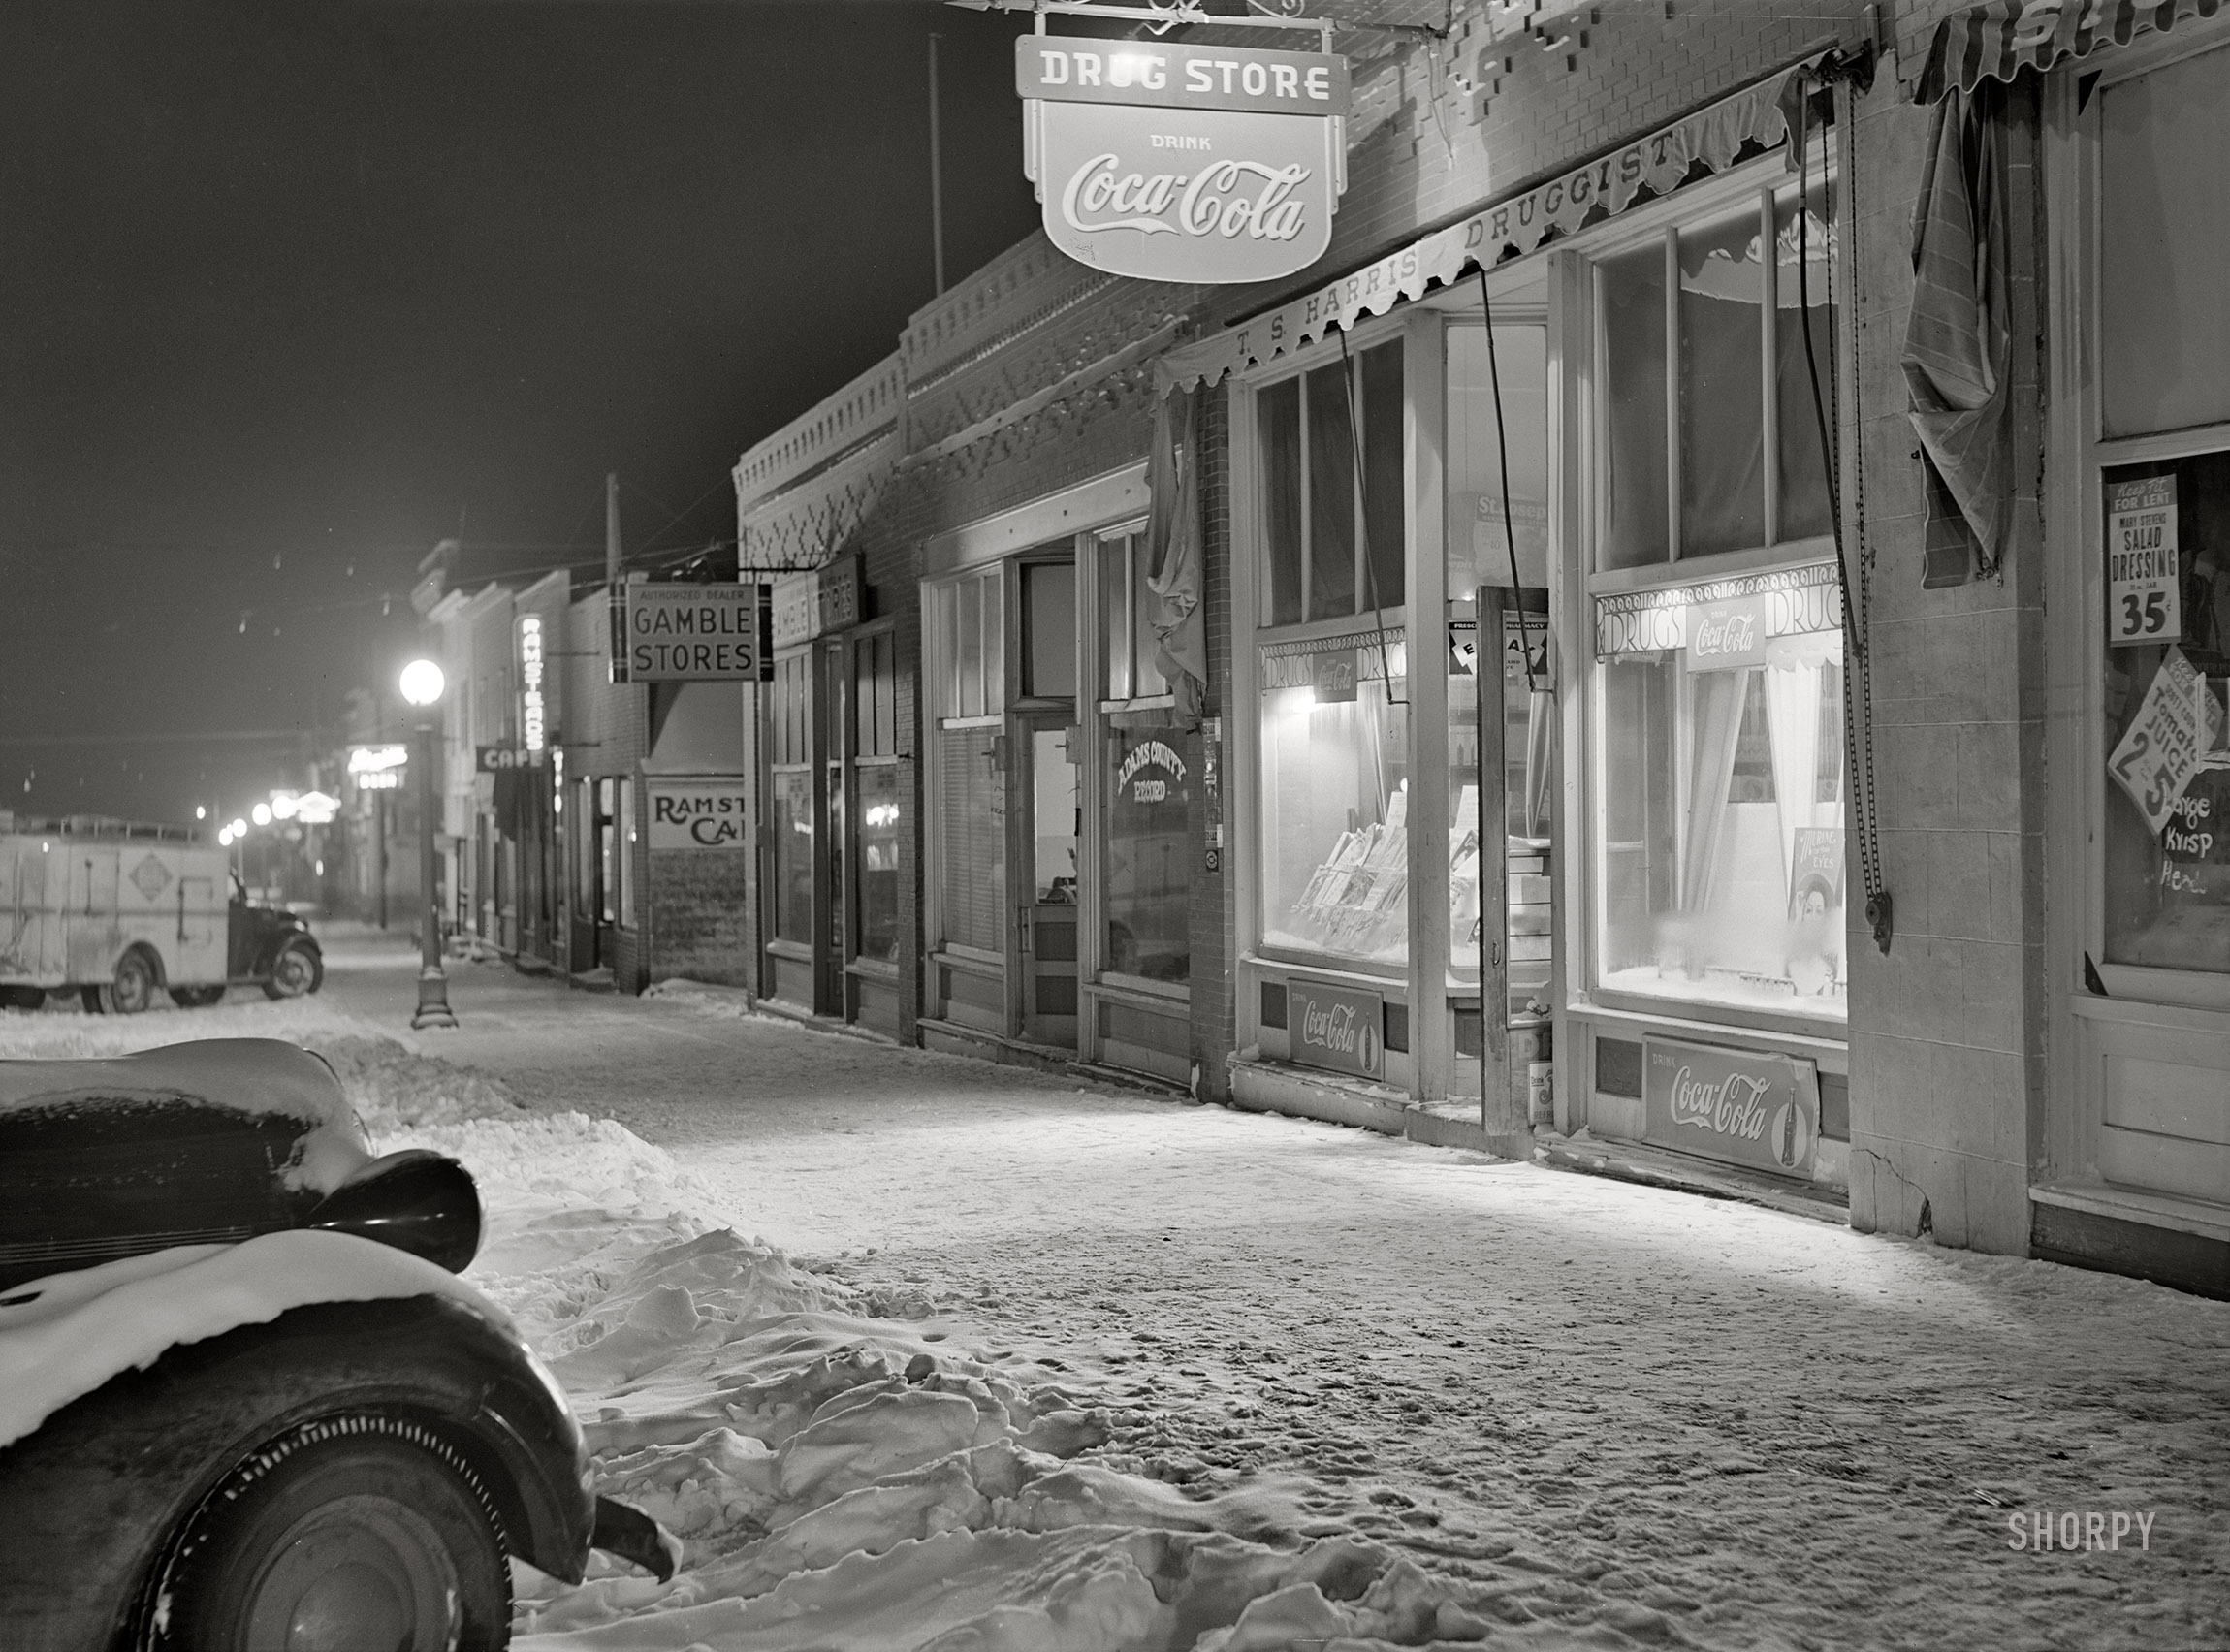 February 1942. "Hettinger, North Dakota. Street scene after a snowstorm." Medium format acetate negative by John Vachon for the Office of War Information. View full size.